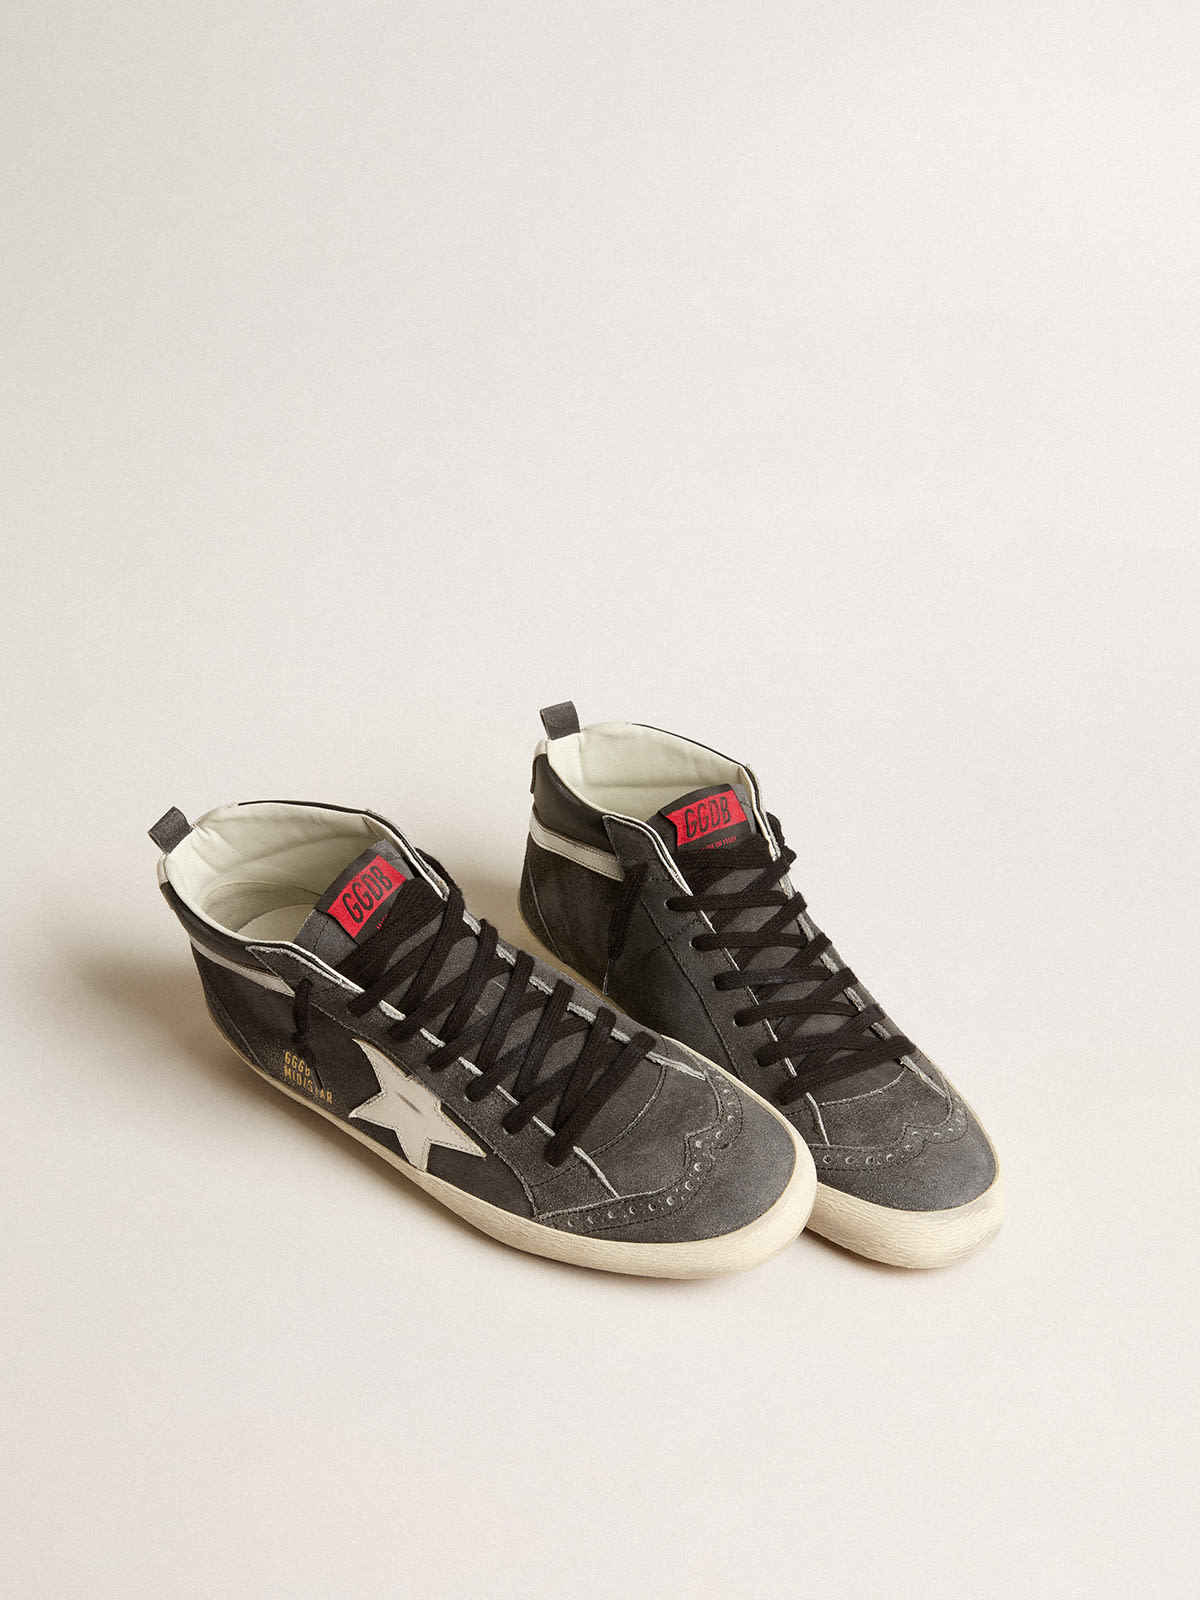 Golden Goose - Mid Star in black suede with white leather star and silver flash in 